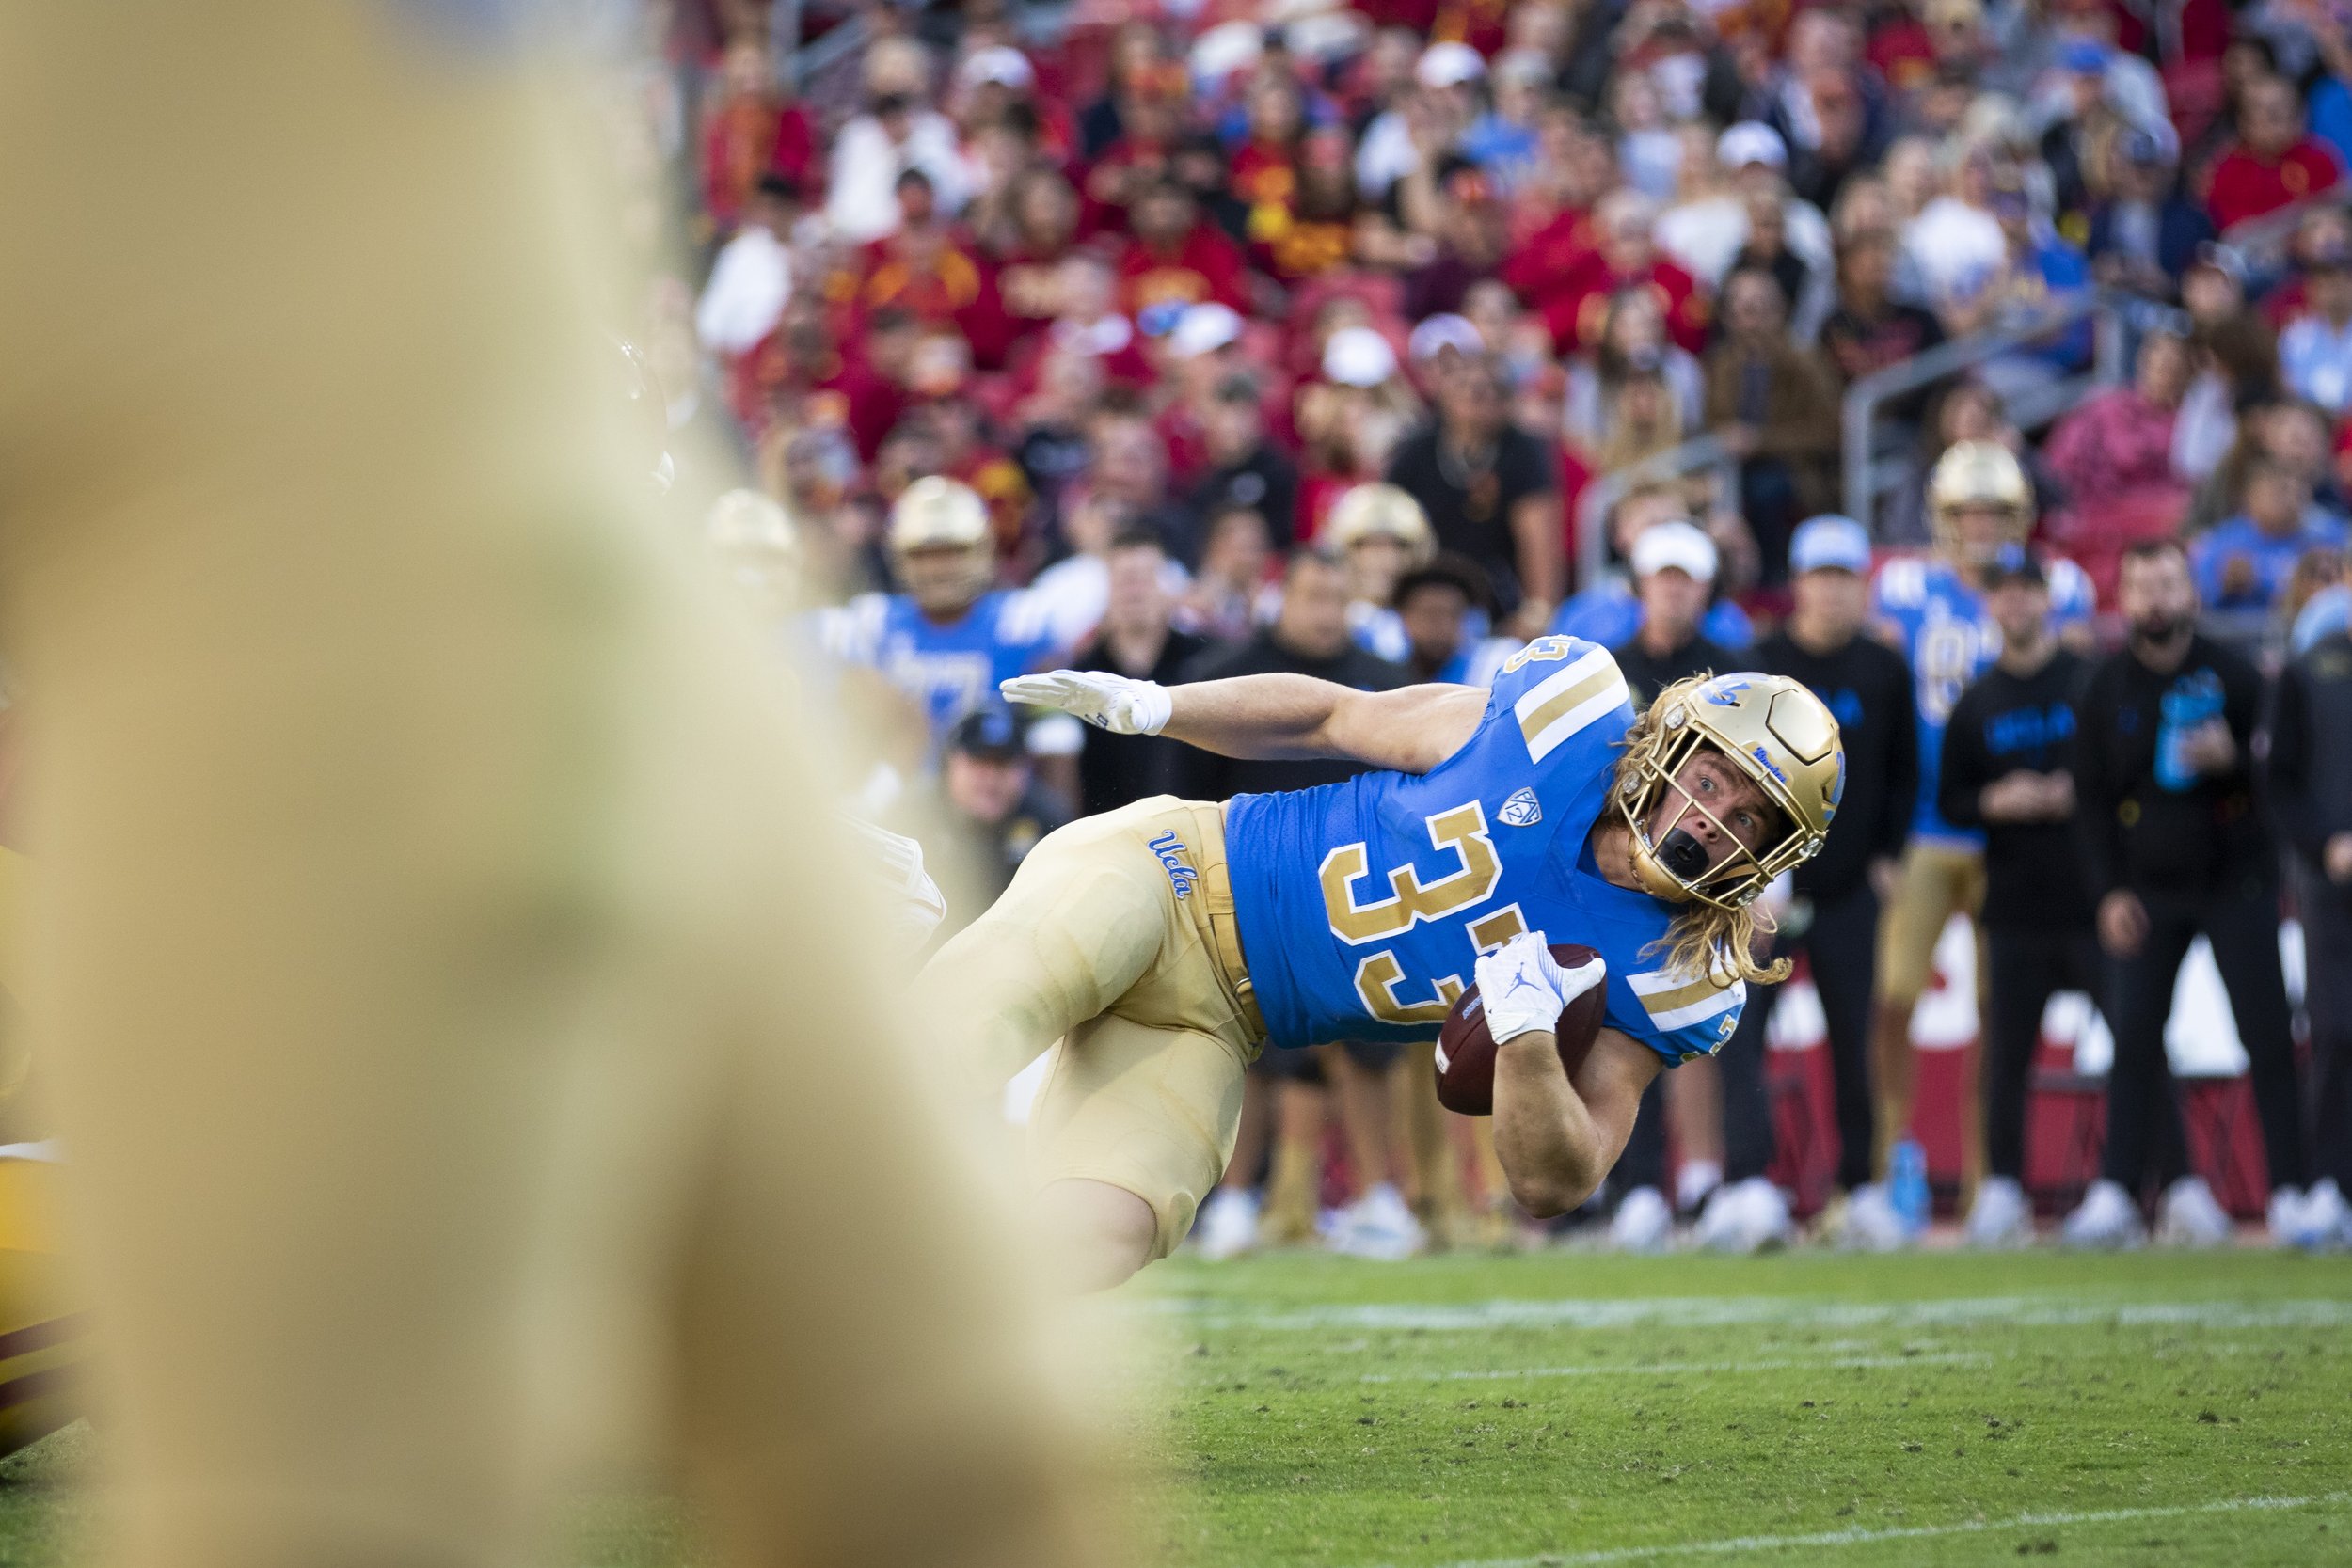  University of California, Los Angeles (UCLA) Bruin running back Carson Steele being tackled by University of Southern California (USC) Trojans during the third quarter of a football game at the Los Angeles Memorial Coliseum, in Los Angeles, Calif., 